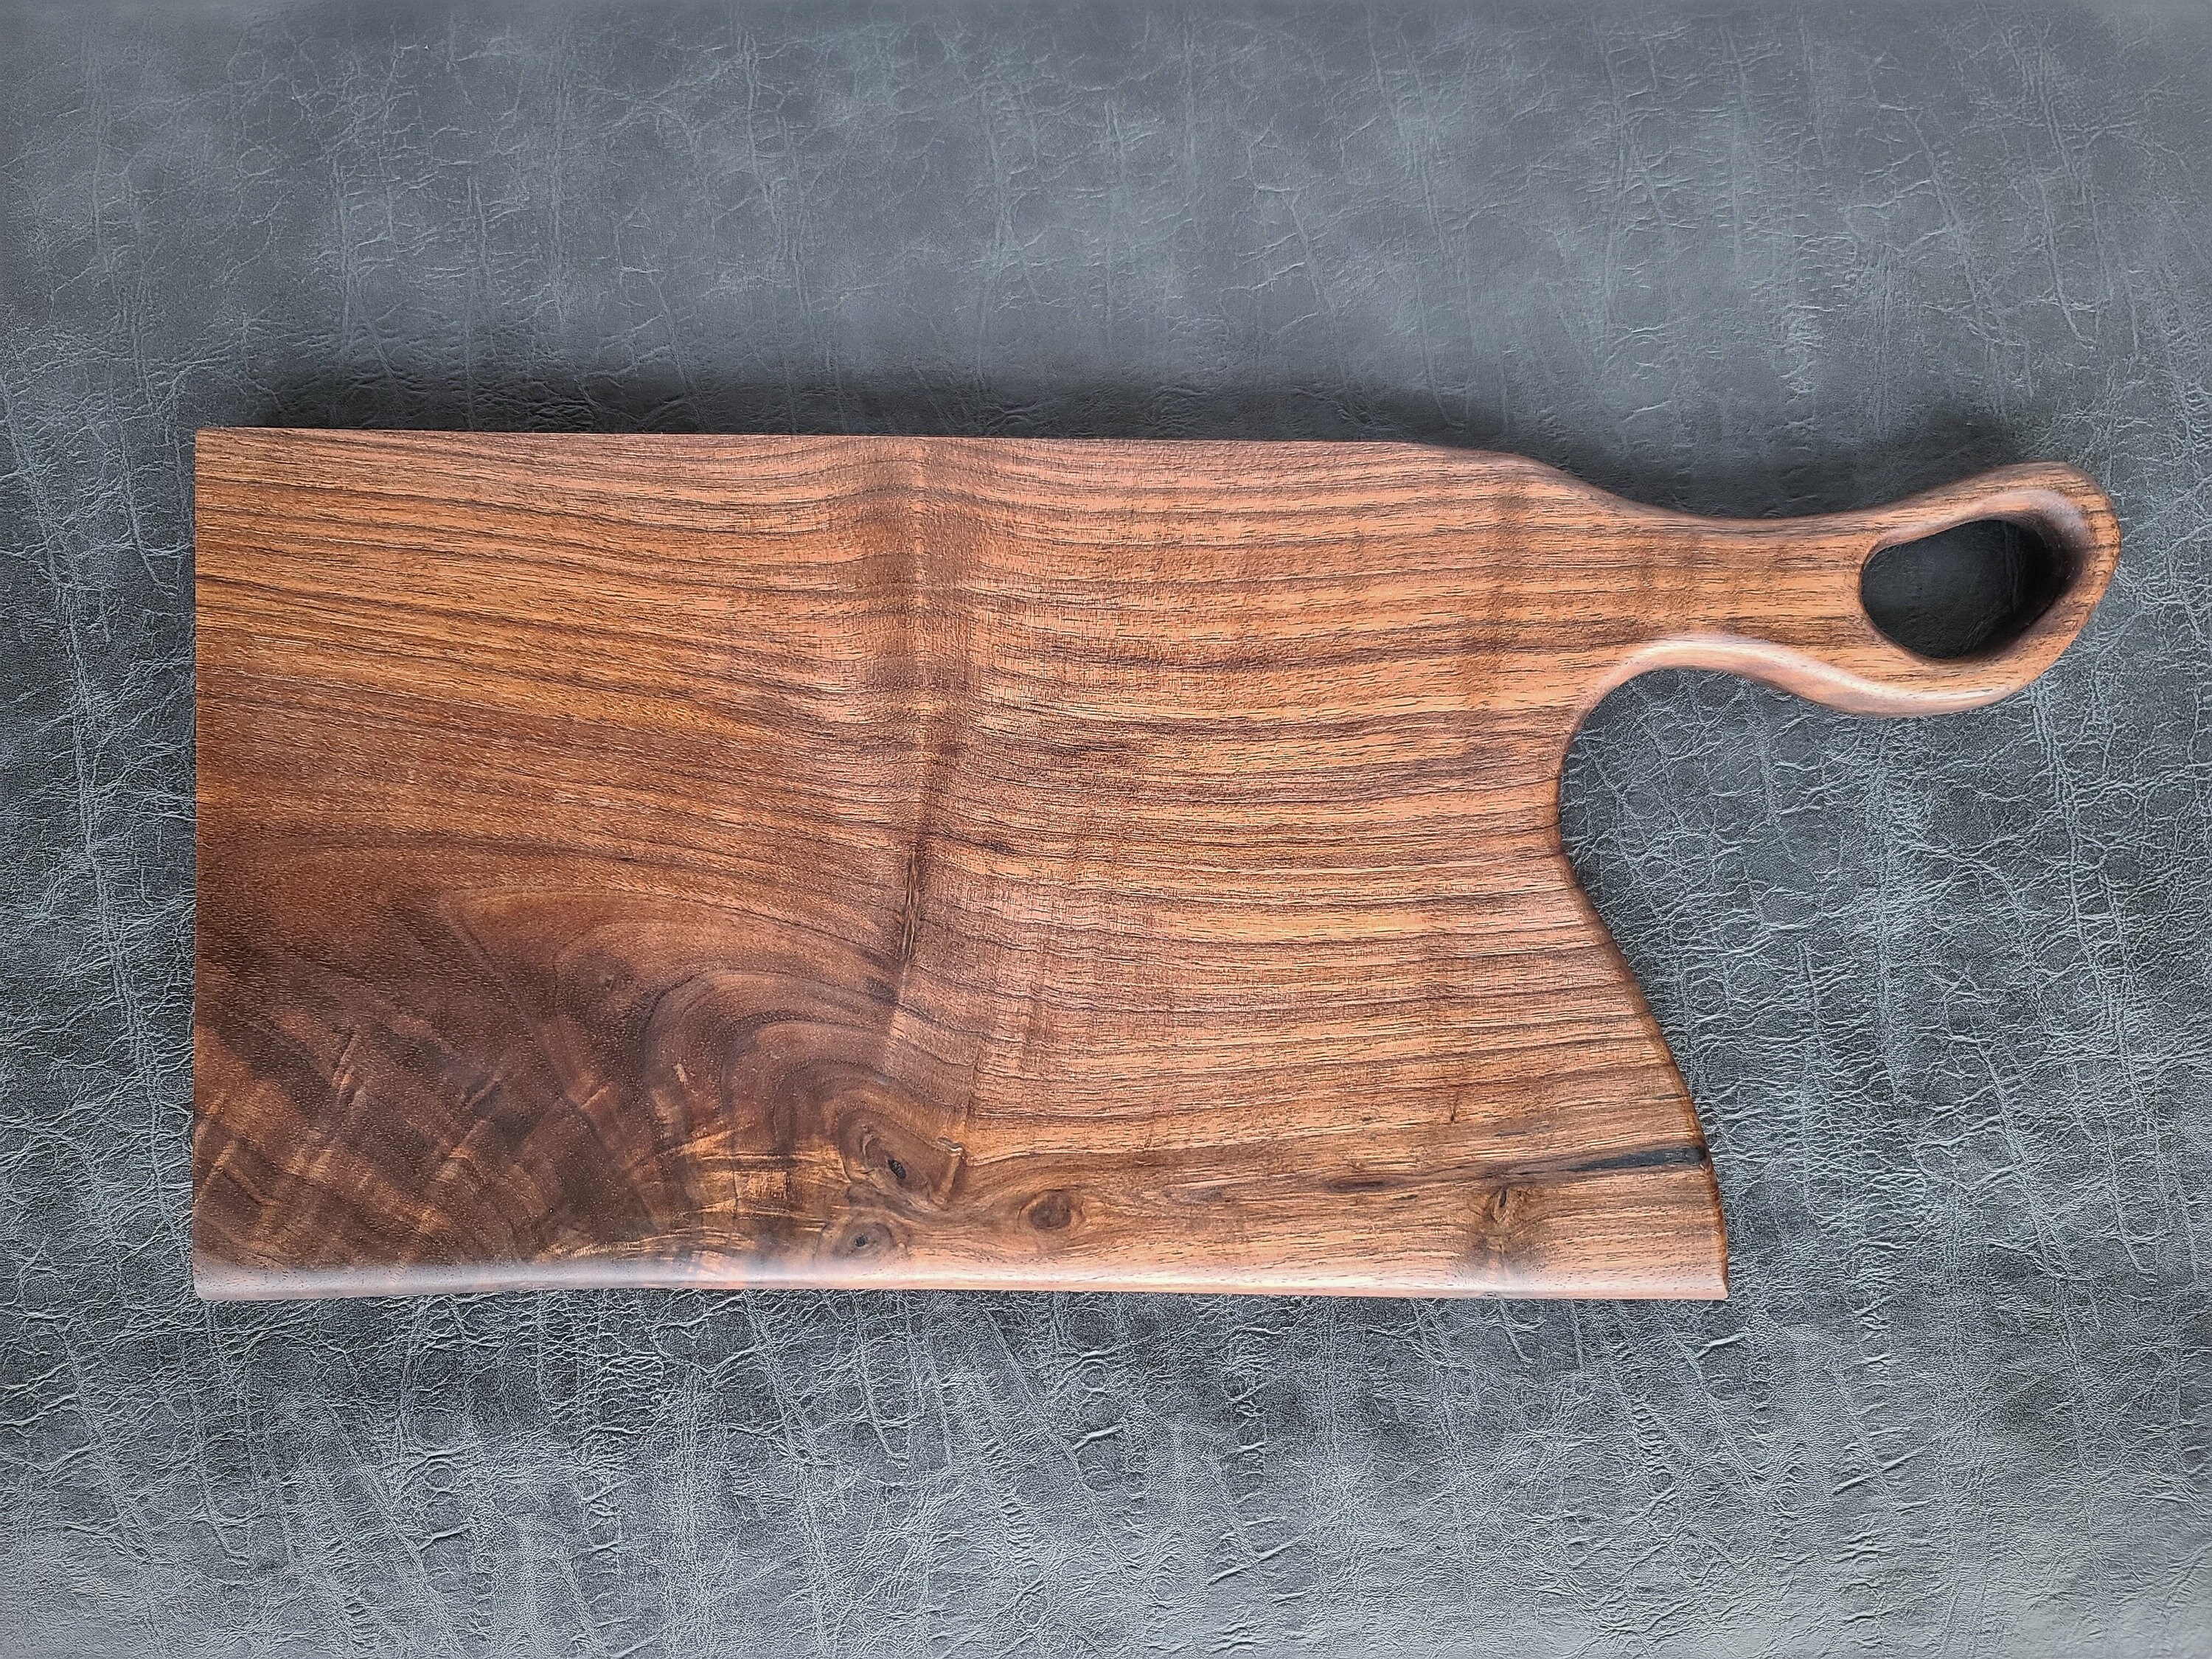 Muso Wood Walnut Cutting Board for Kitchen, Wooden Chopping Board with Handle to Hang, Square Bread Pizza Cheese Board, Charcuterie Board used for